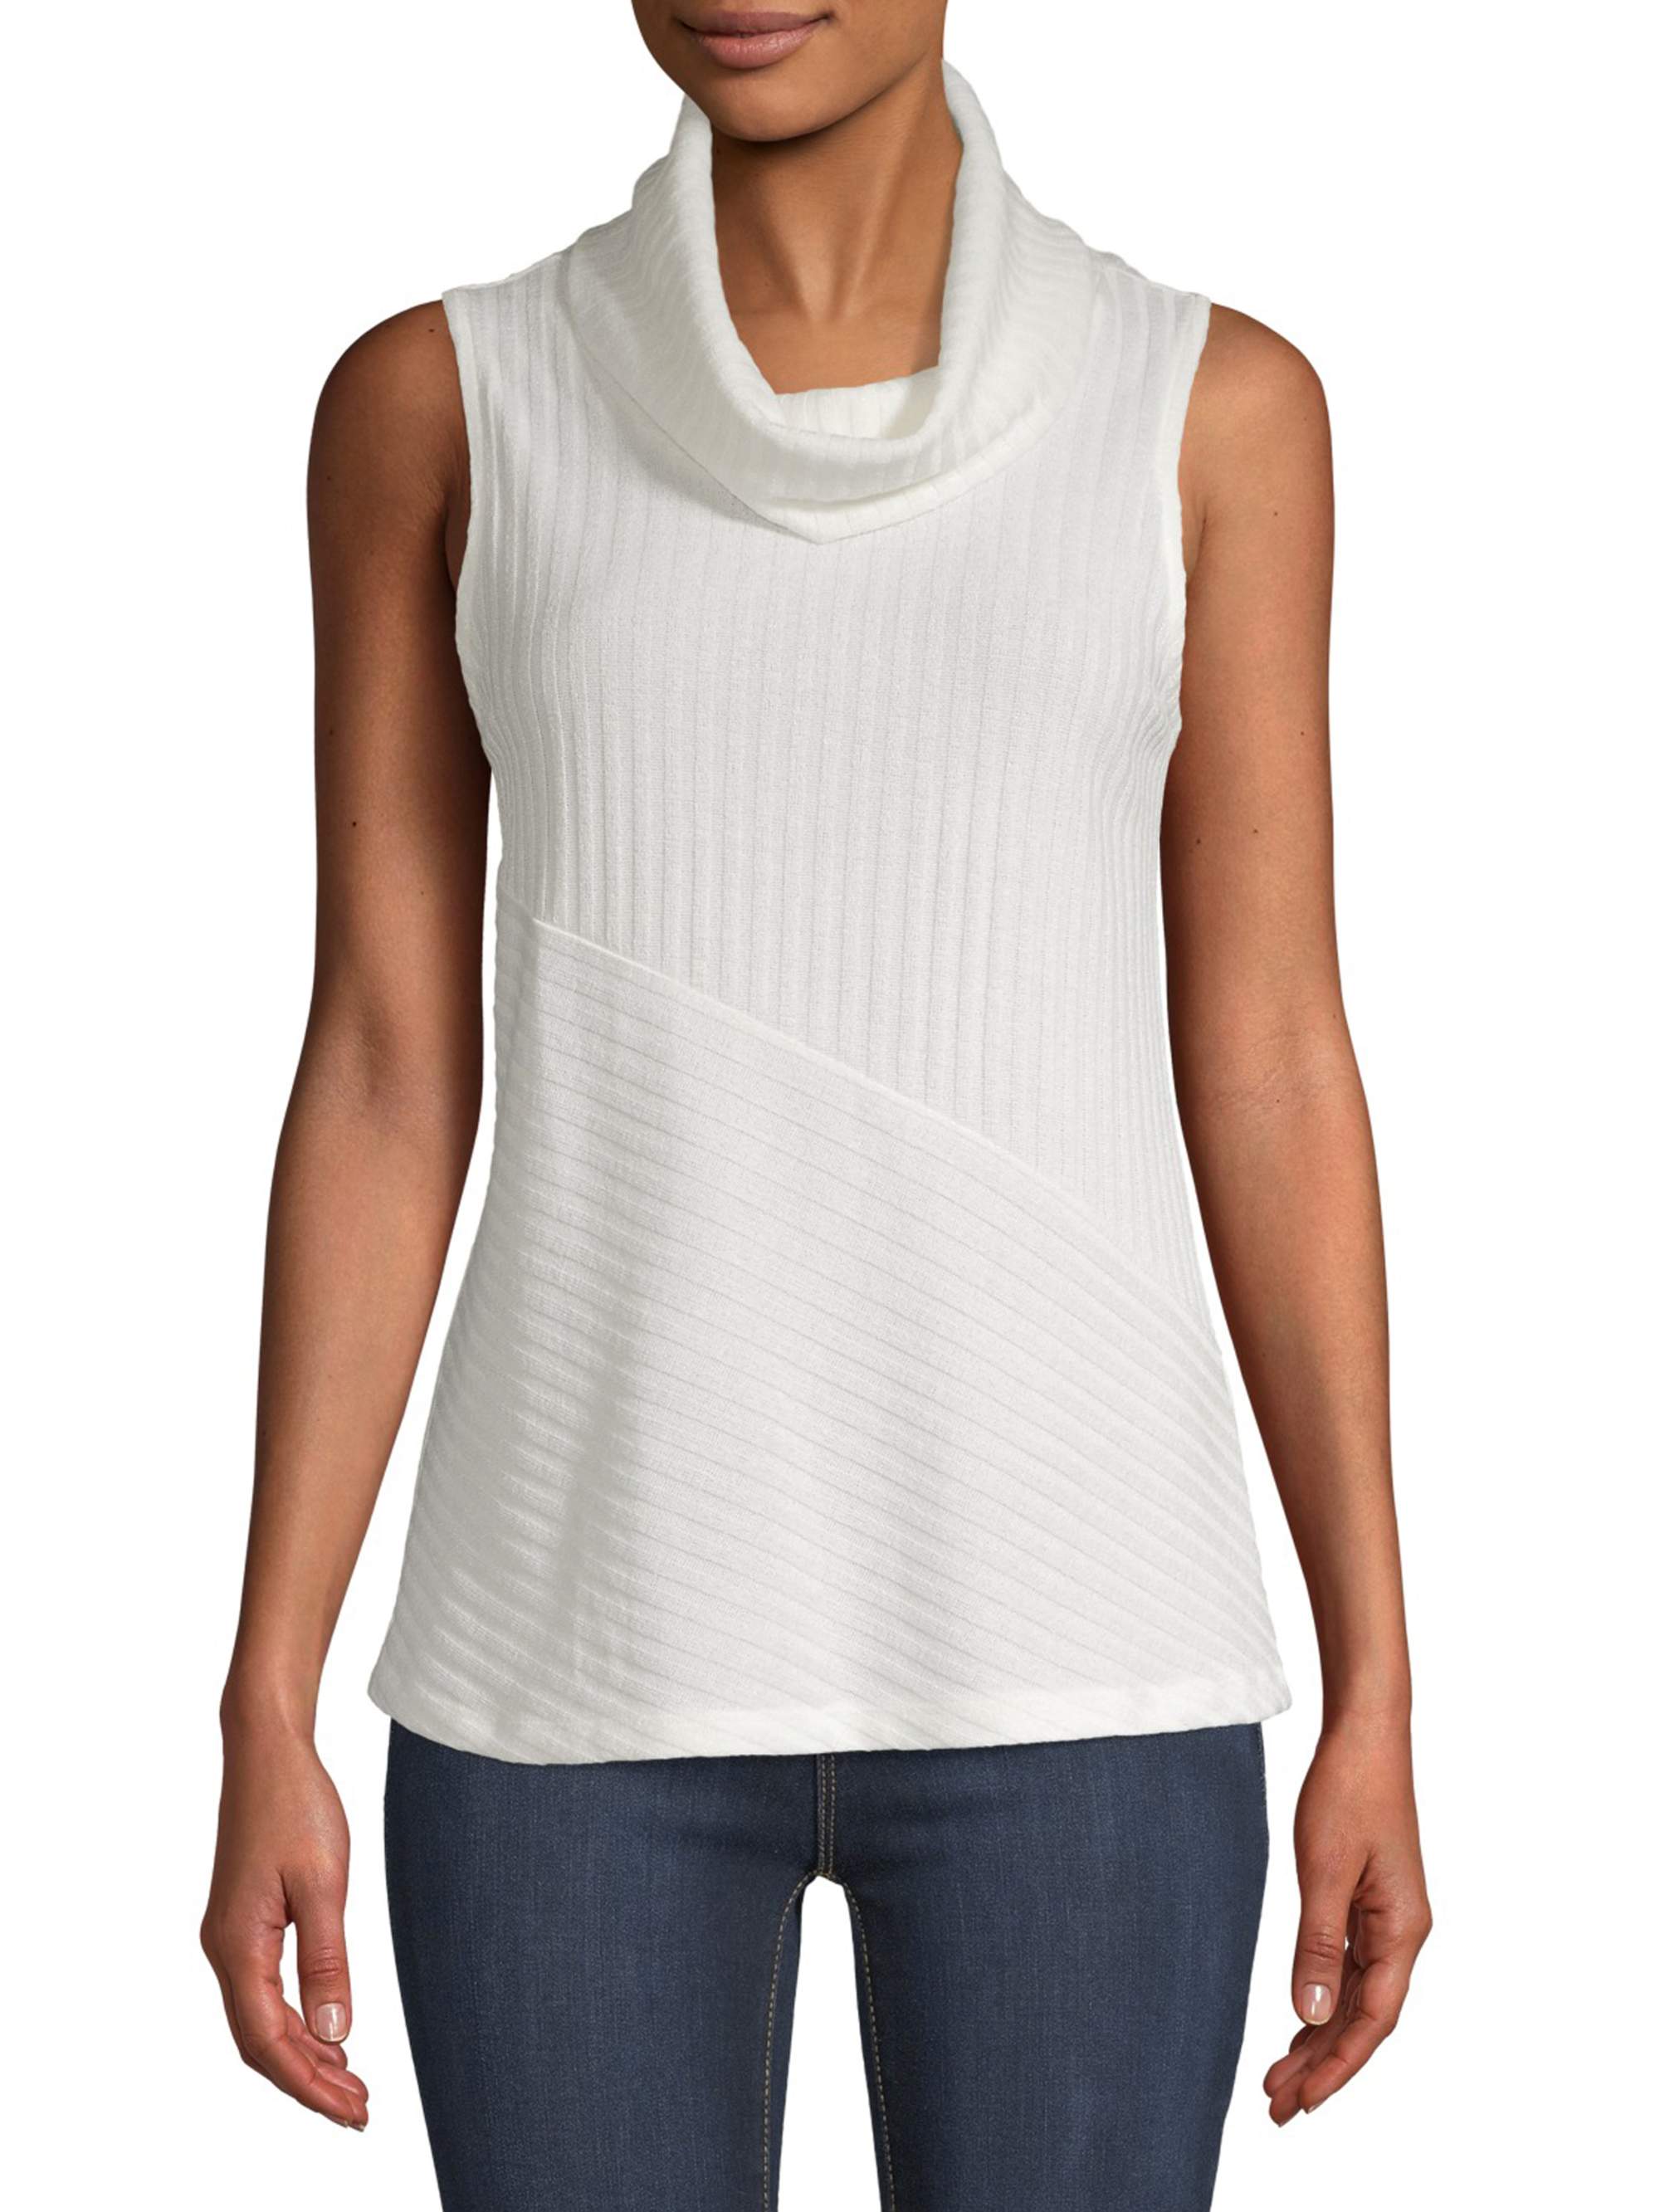 Time and Tru Women's Sleeveless Turtleneck Sweater - image 1 of 5